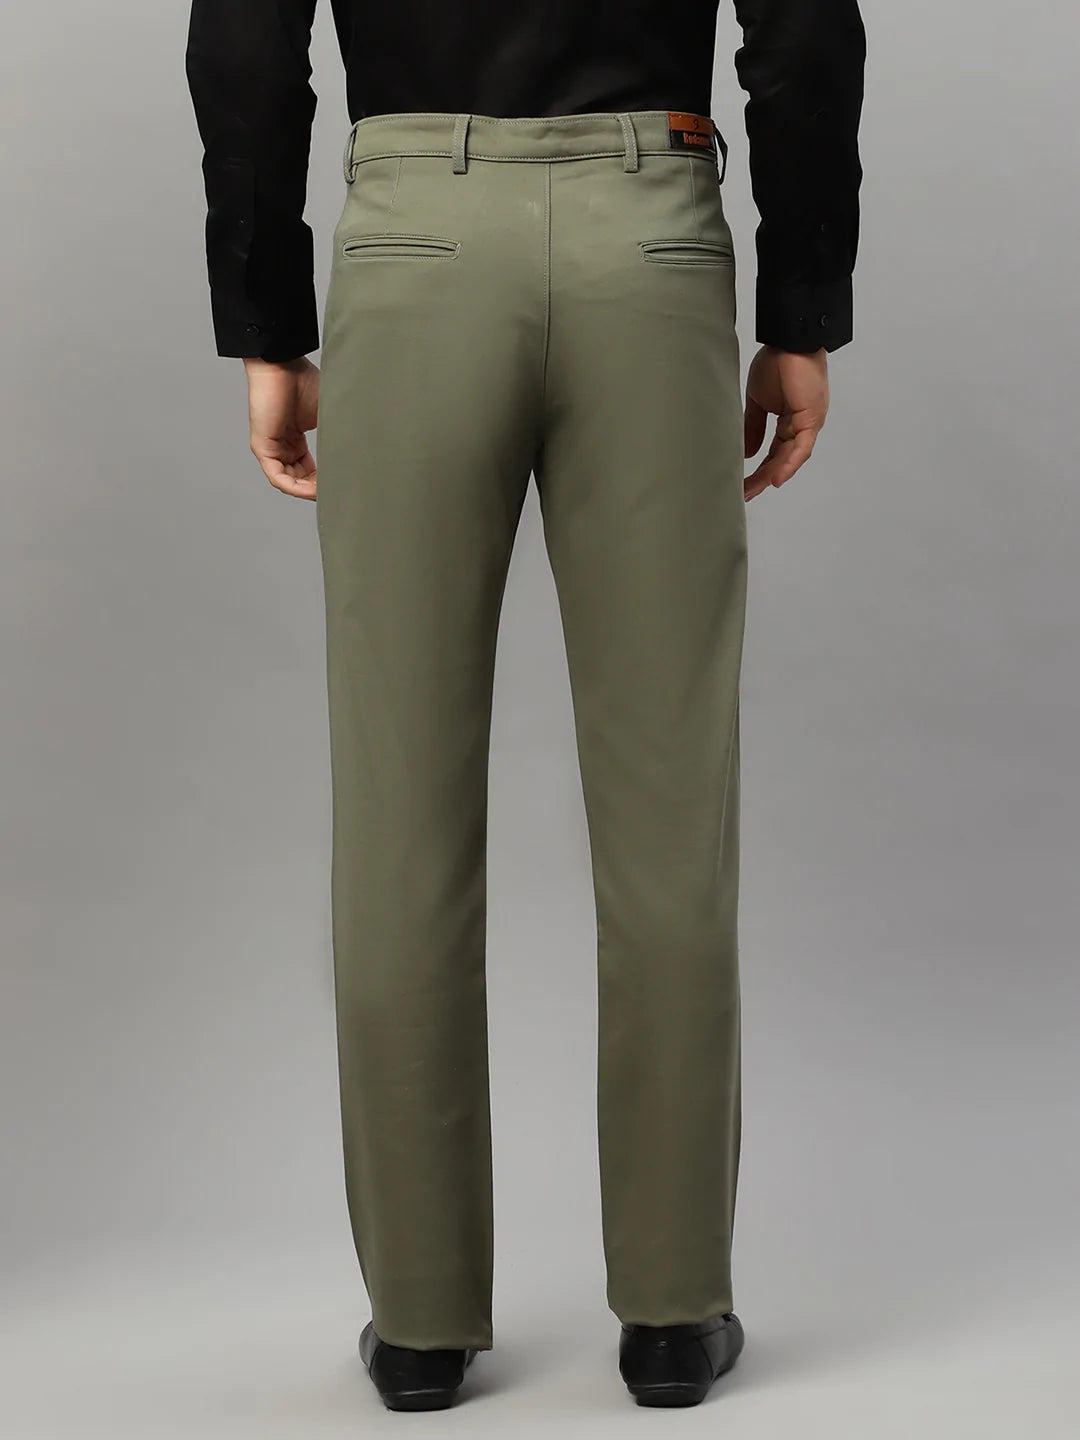 Cyphus Men's Solid Olive Trousers